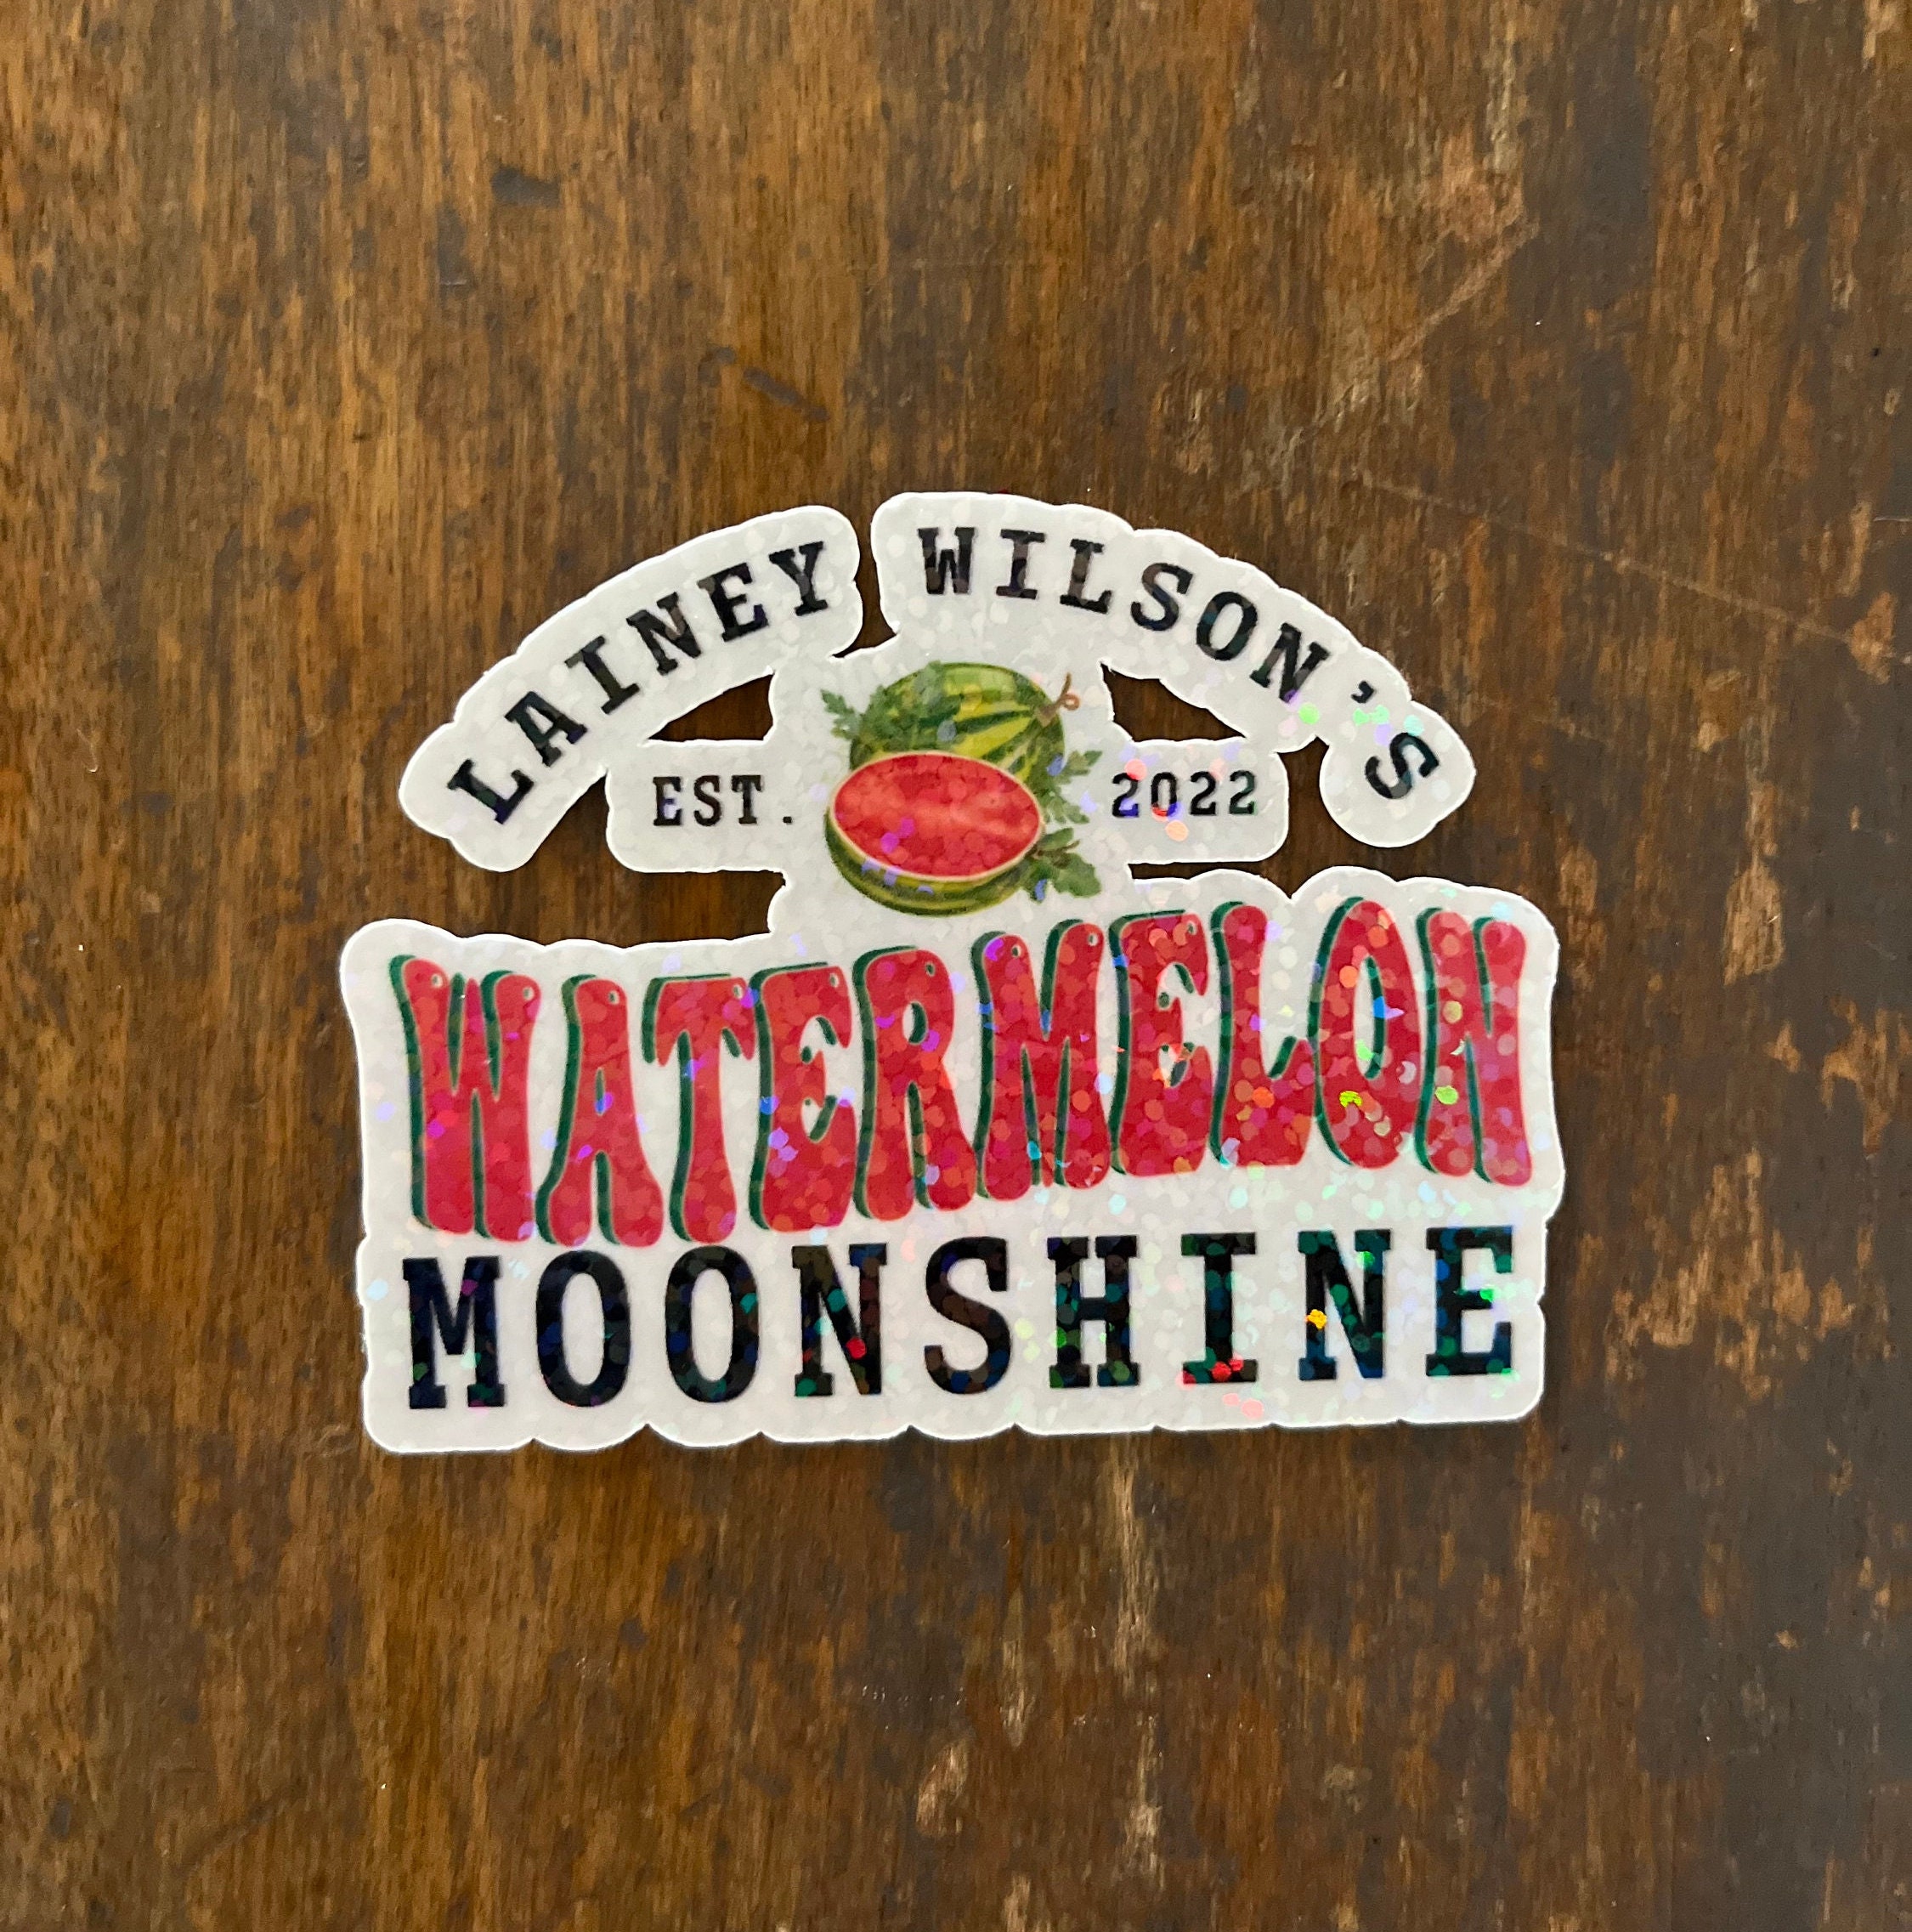 A little something fun to drink your Watermelon Moonshine from. July 1, Lainey Wilson